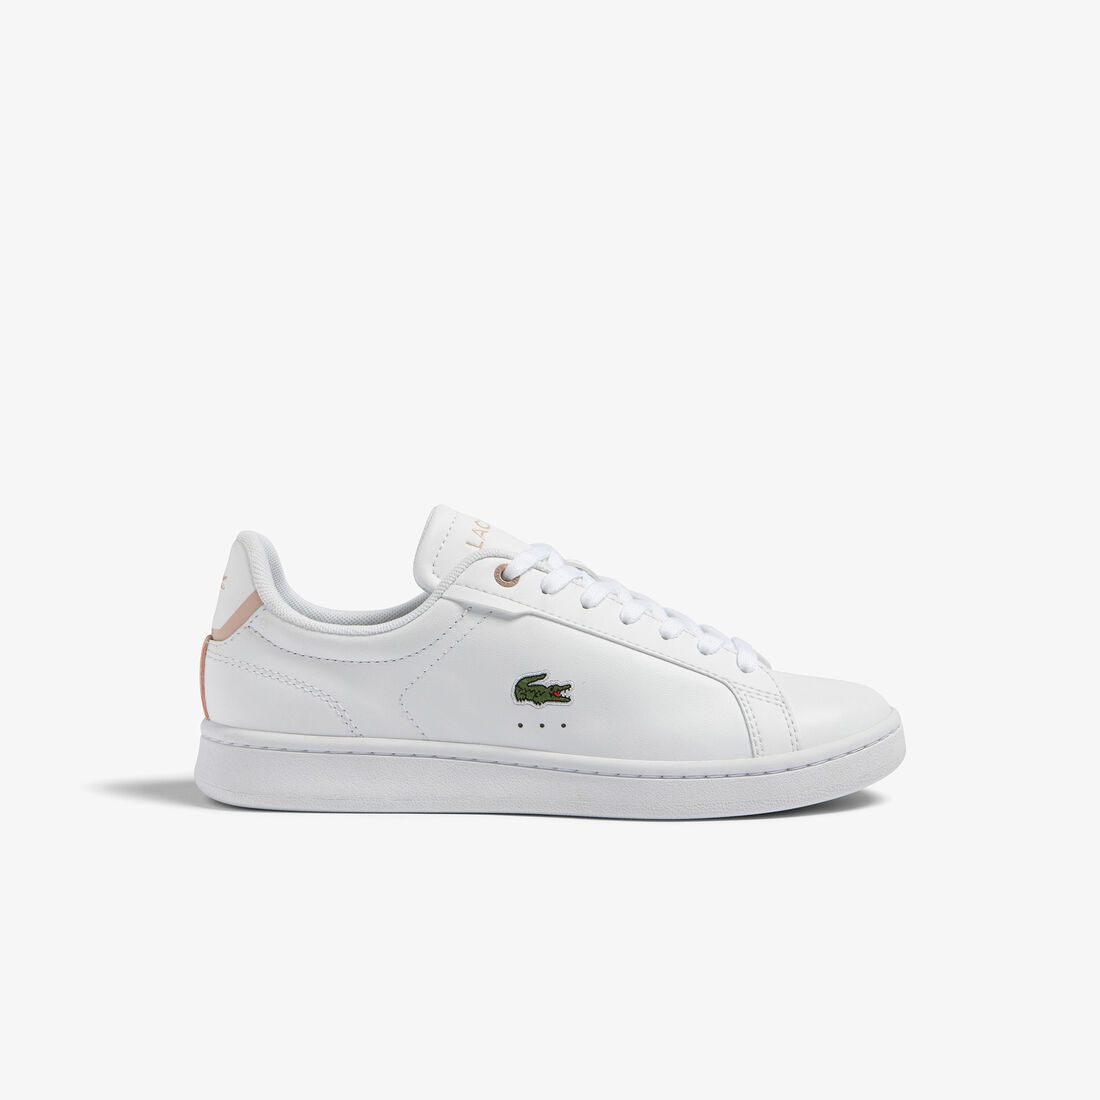 Women's Lacoste Carnaby Pro BL Tonal Leather Trainers - 45SFA0083-1Y9